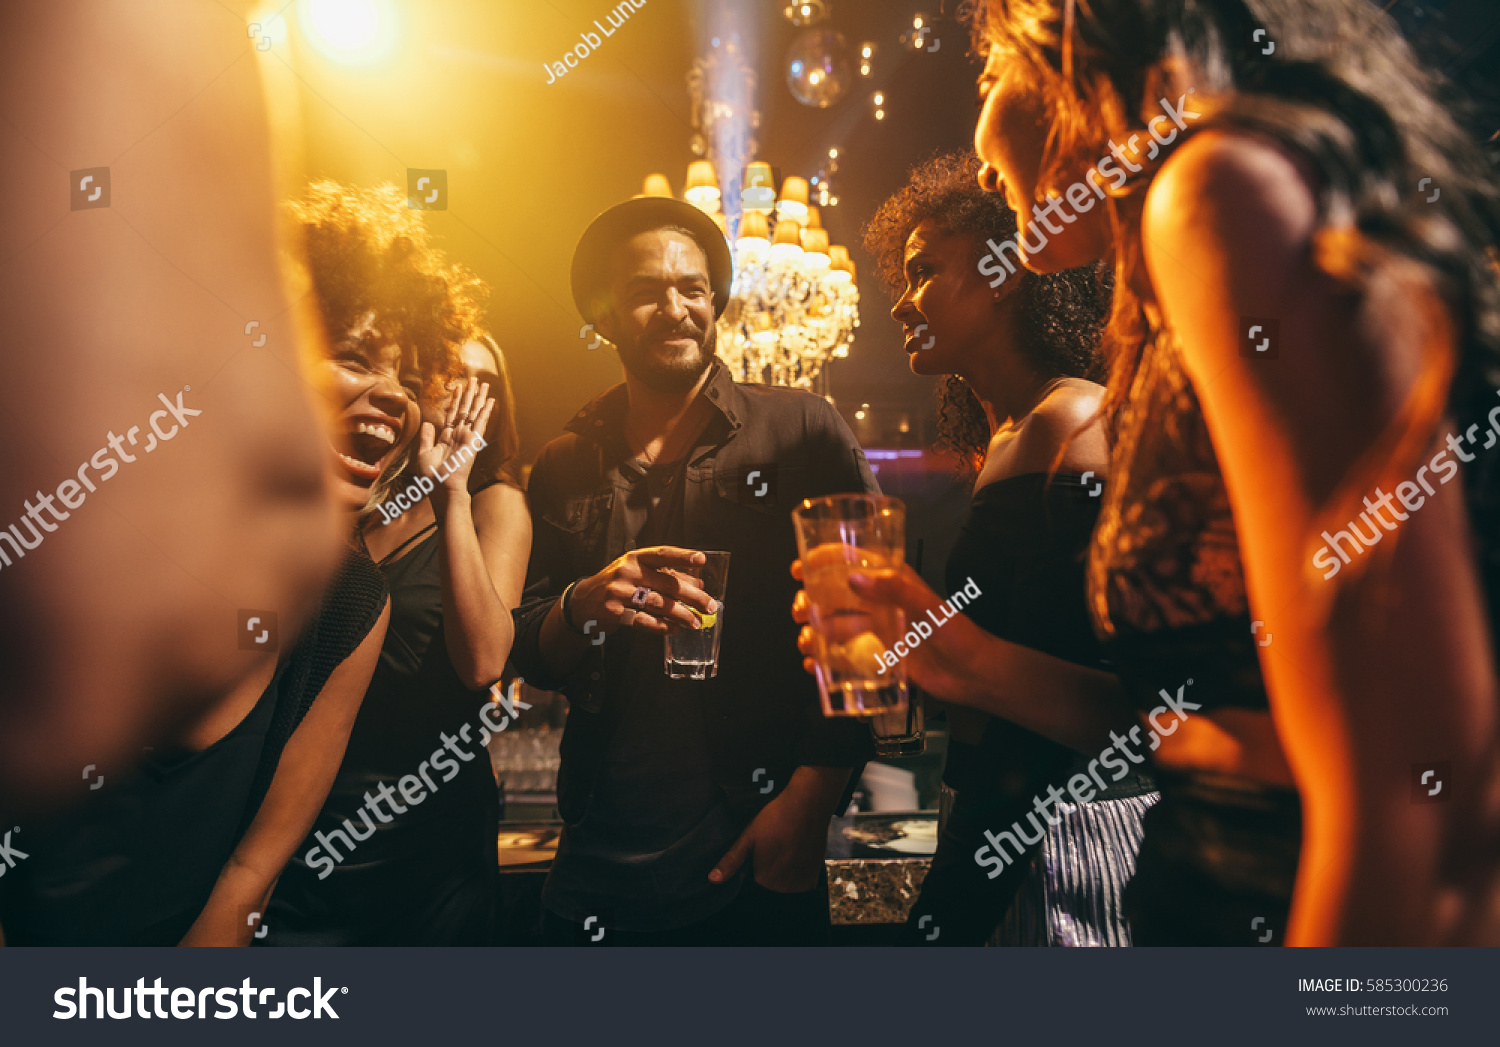 Image group of friends enjoying a party at pub. Happy young people having fun at nightclub. #585300236